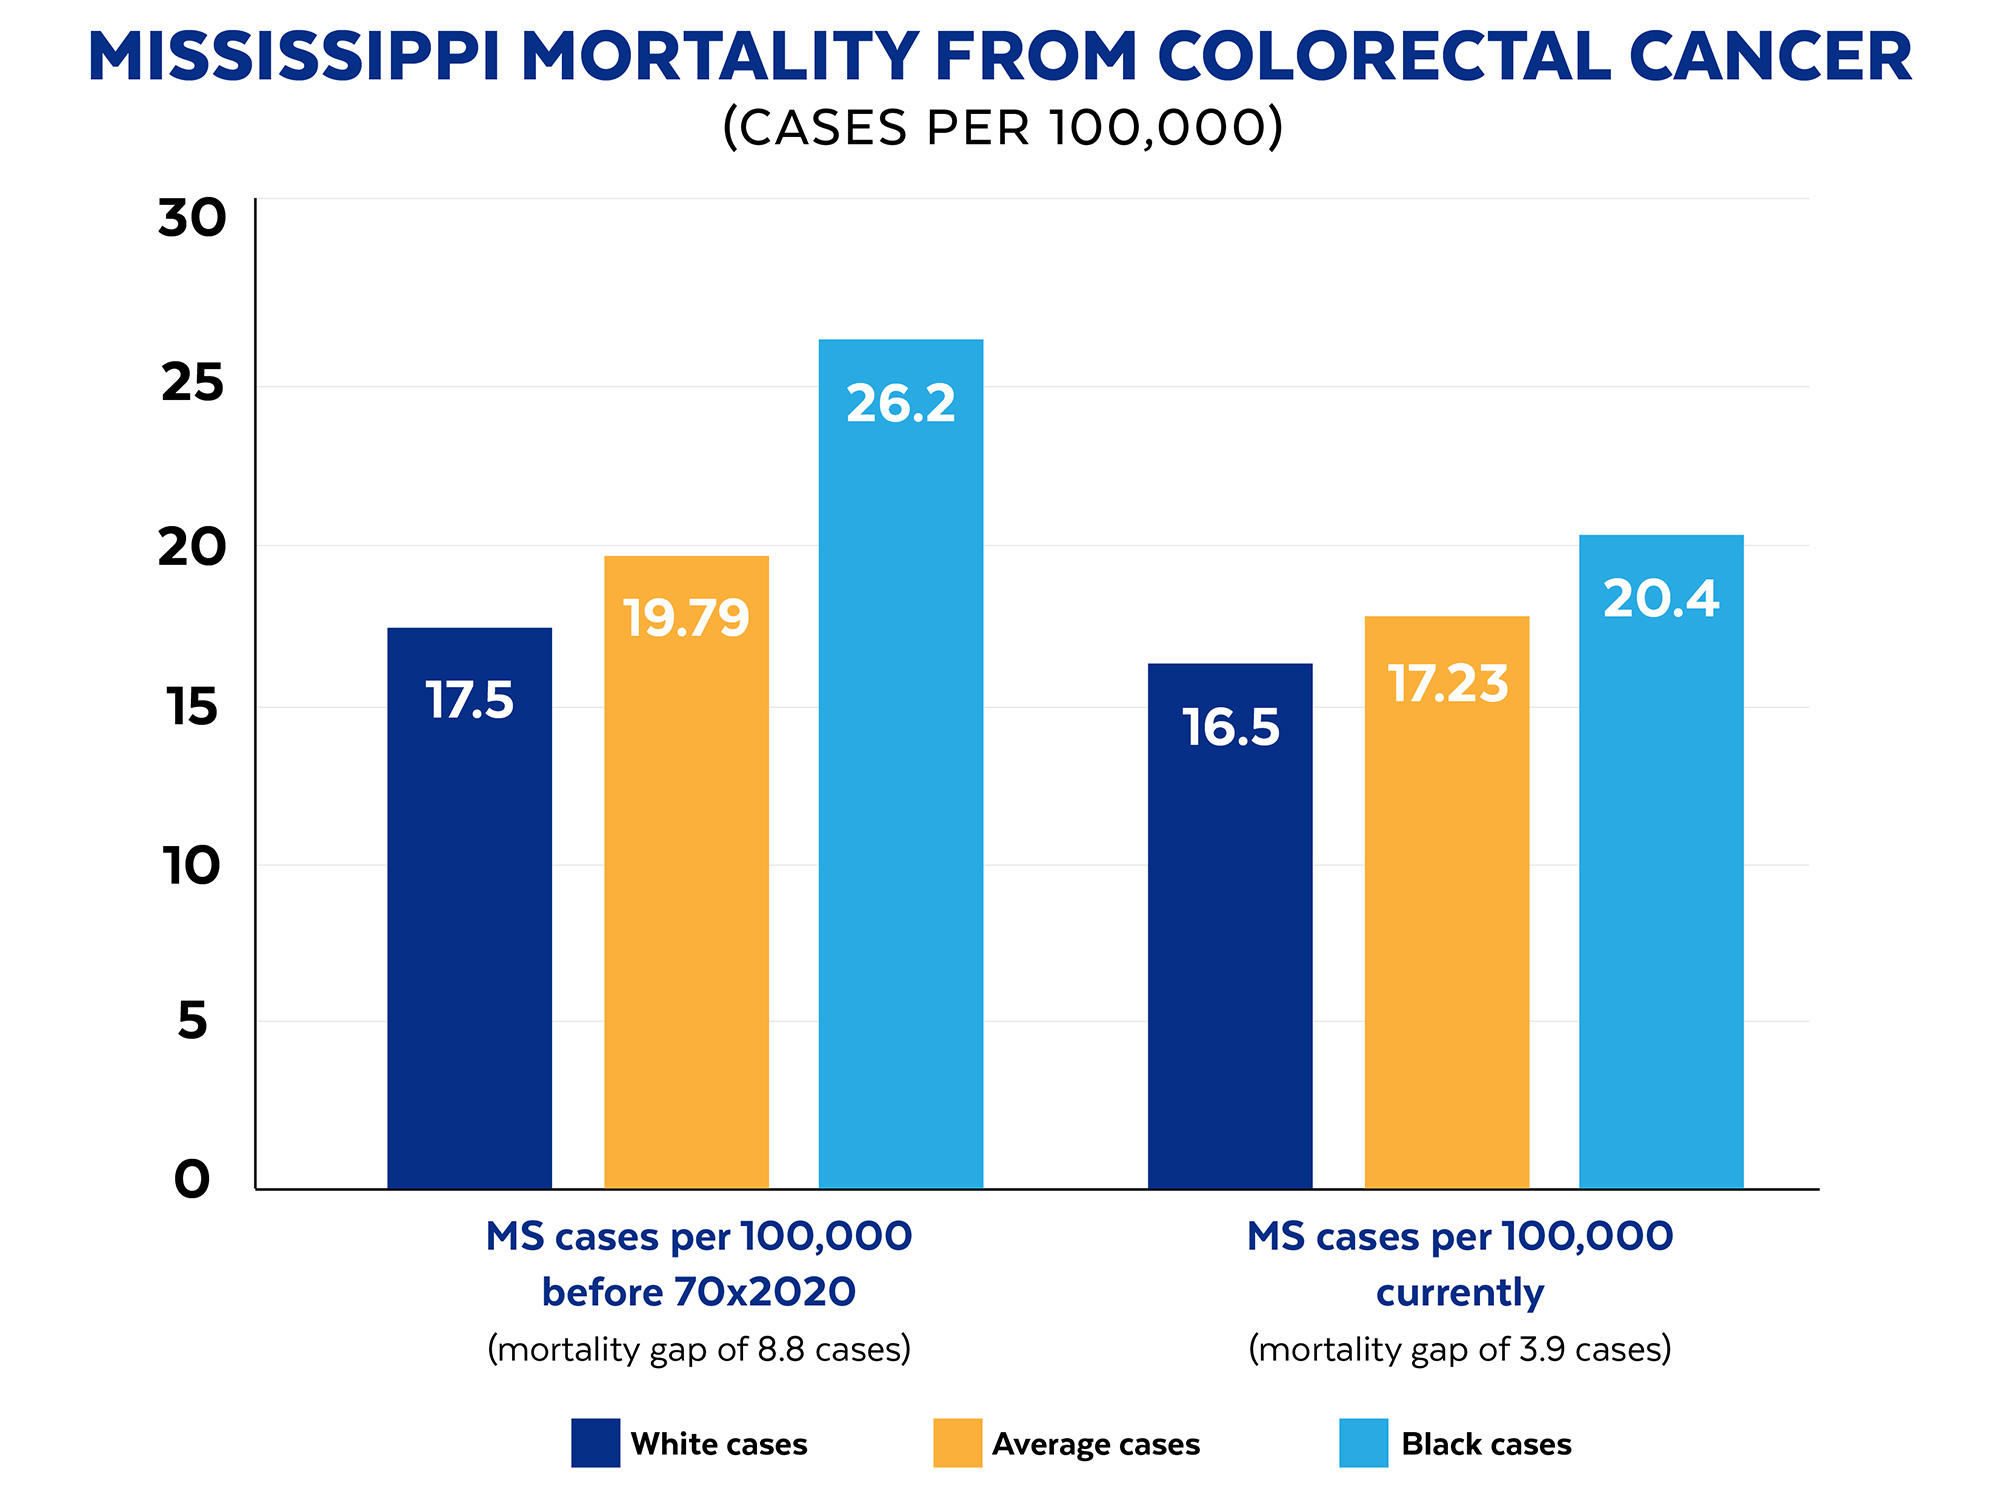 Before 70X2020, the average Mississippi mortality from colorectal cancer was 19.79 cases per 100,000 population, with black mortality standing at 26.2 cases per 100,000 population and white mortality at 17.5 cases per 100,000 population, representing a mortality gap of 8.8 cases per 100,000 population. 